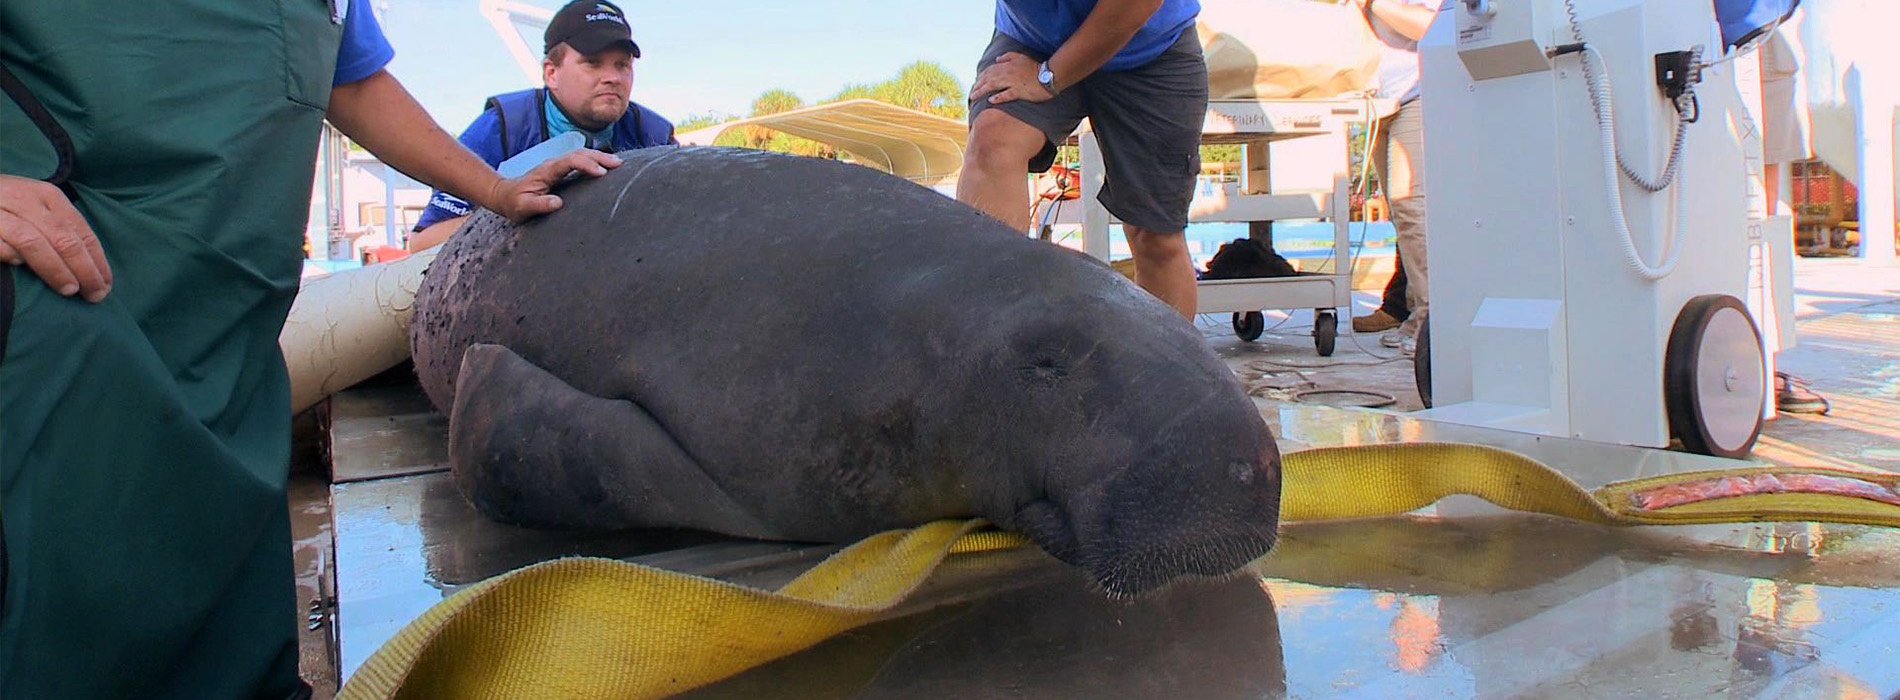 Manatee during rescue 